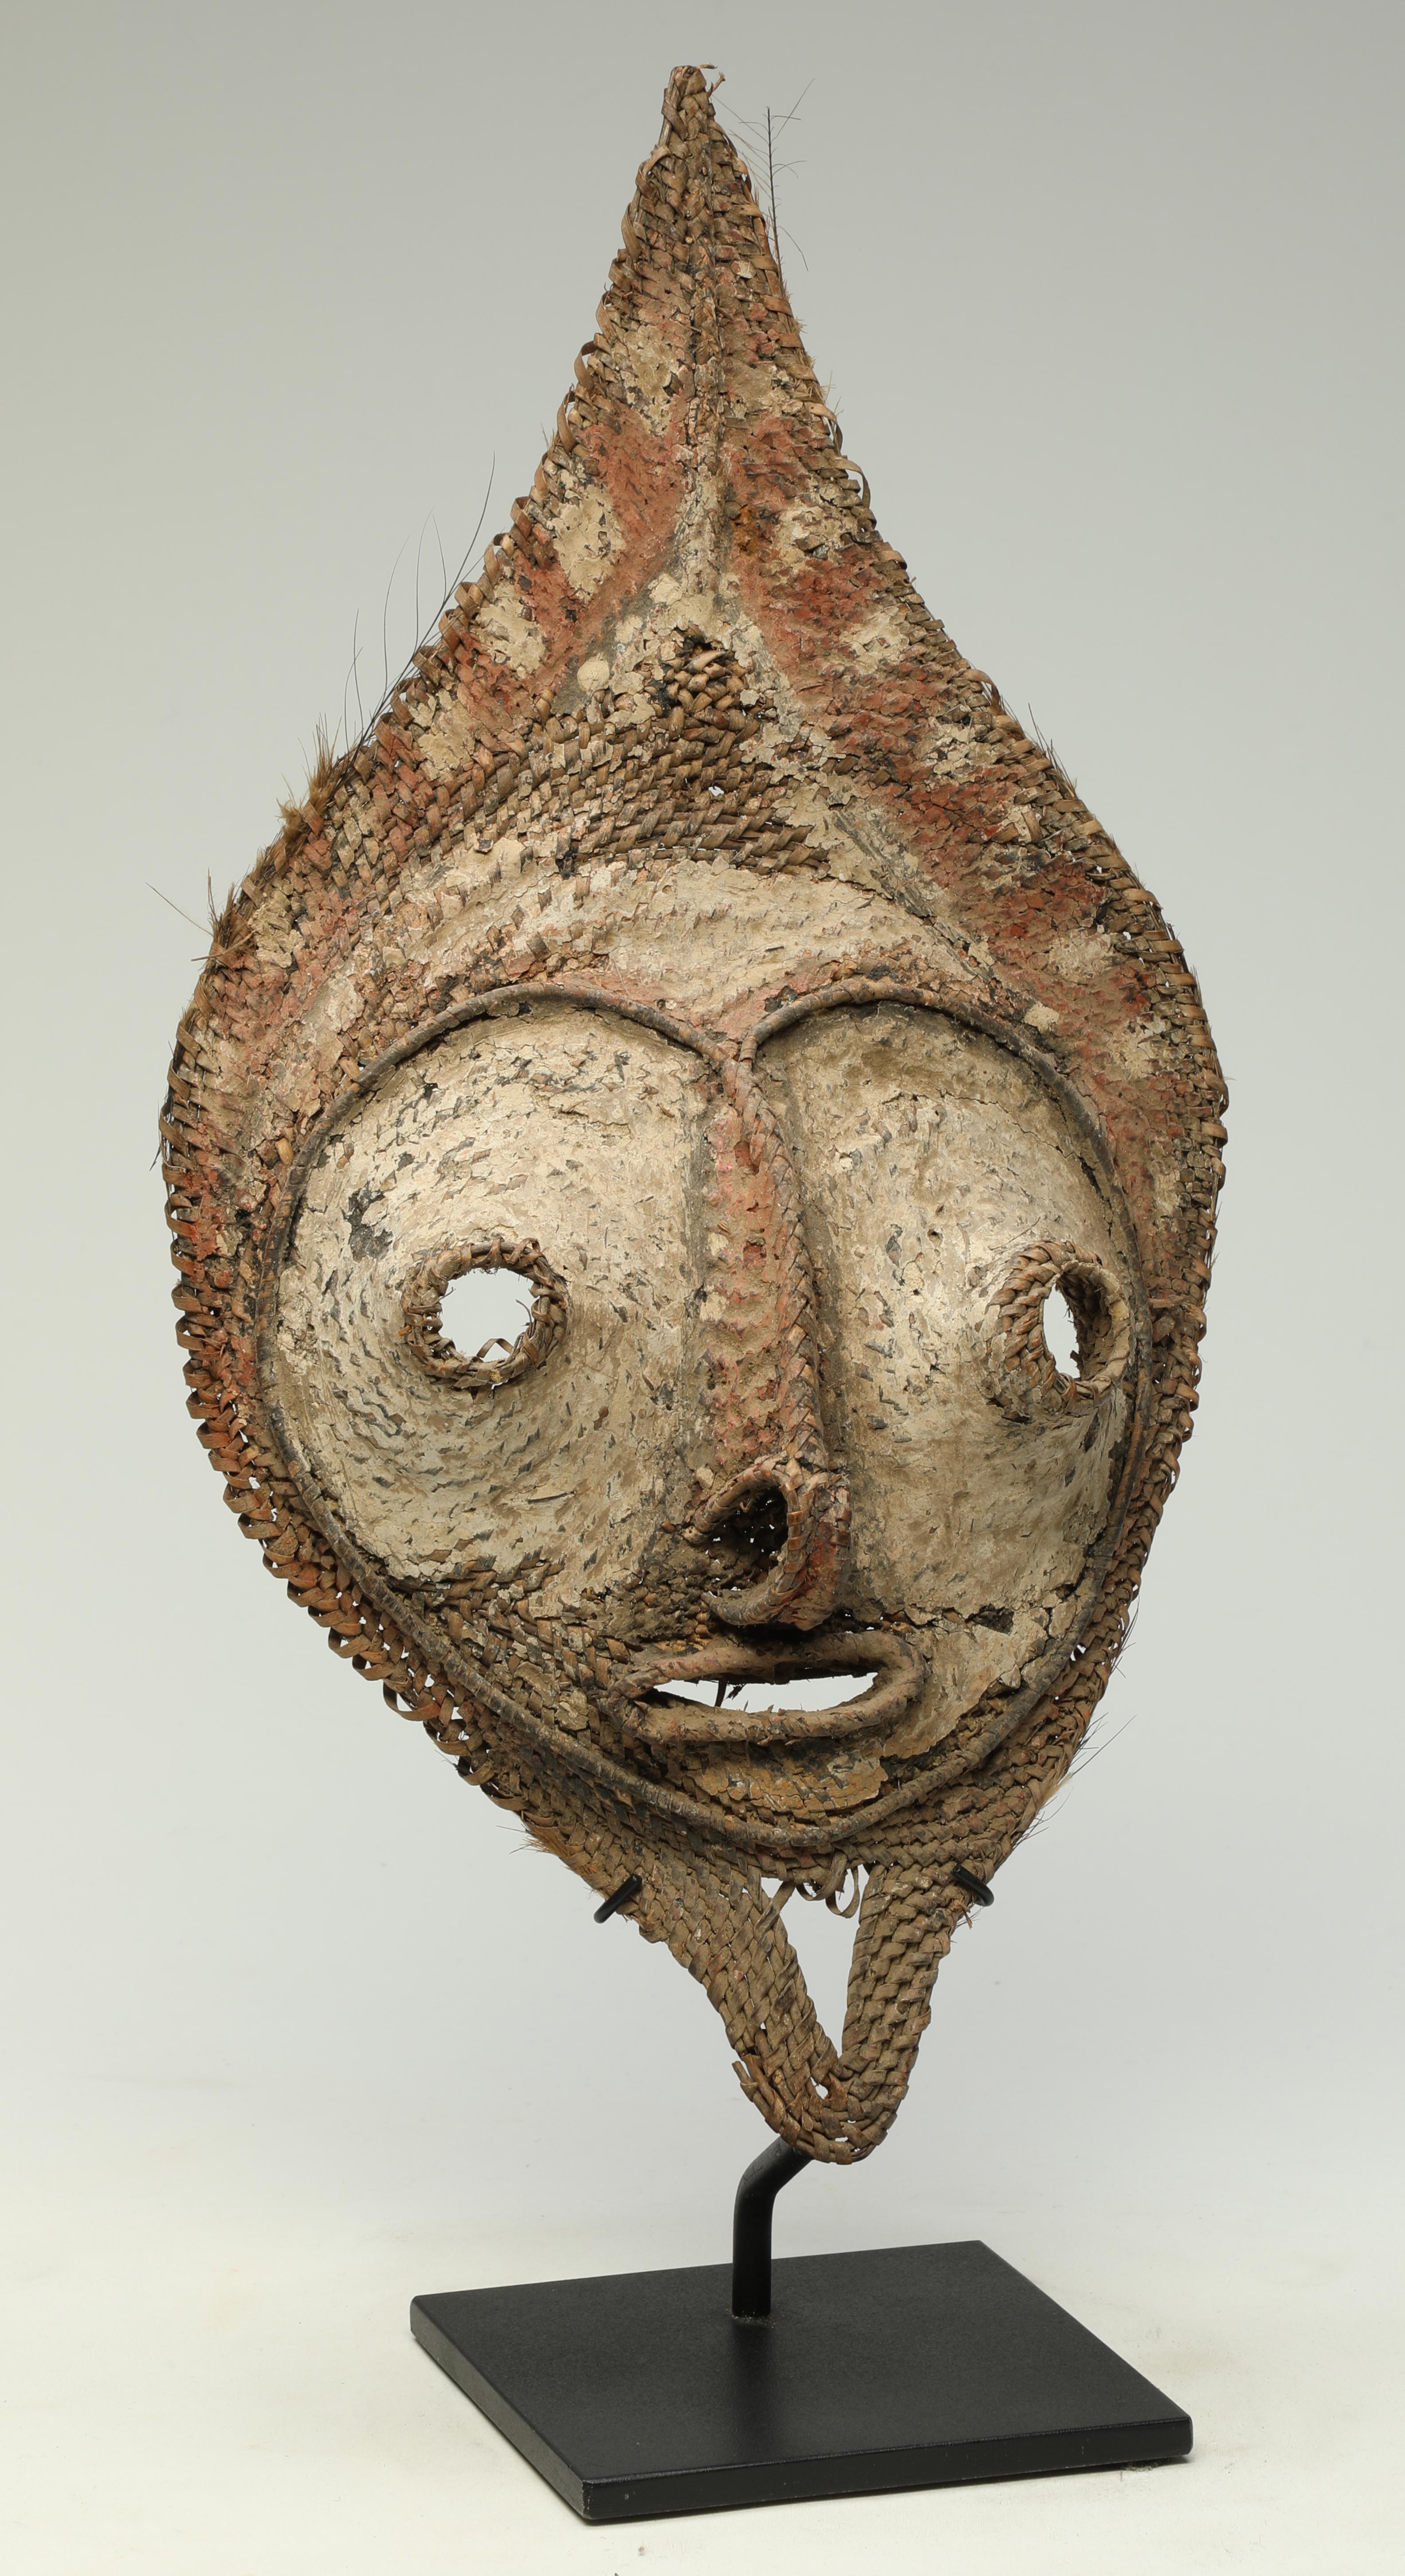 Early Papua New Guinea Sepik tightly woven raffia mask from a talipun bride price currency. 
Areas of white, black and red pigments. Wonderful heart shaped face with open eyes and mouth.
This mask or face would have been tied to a large shell which